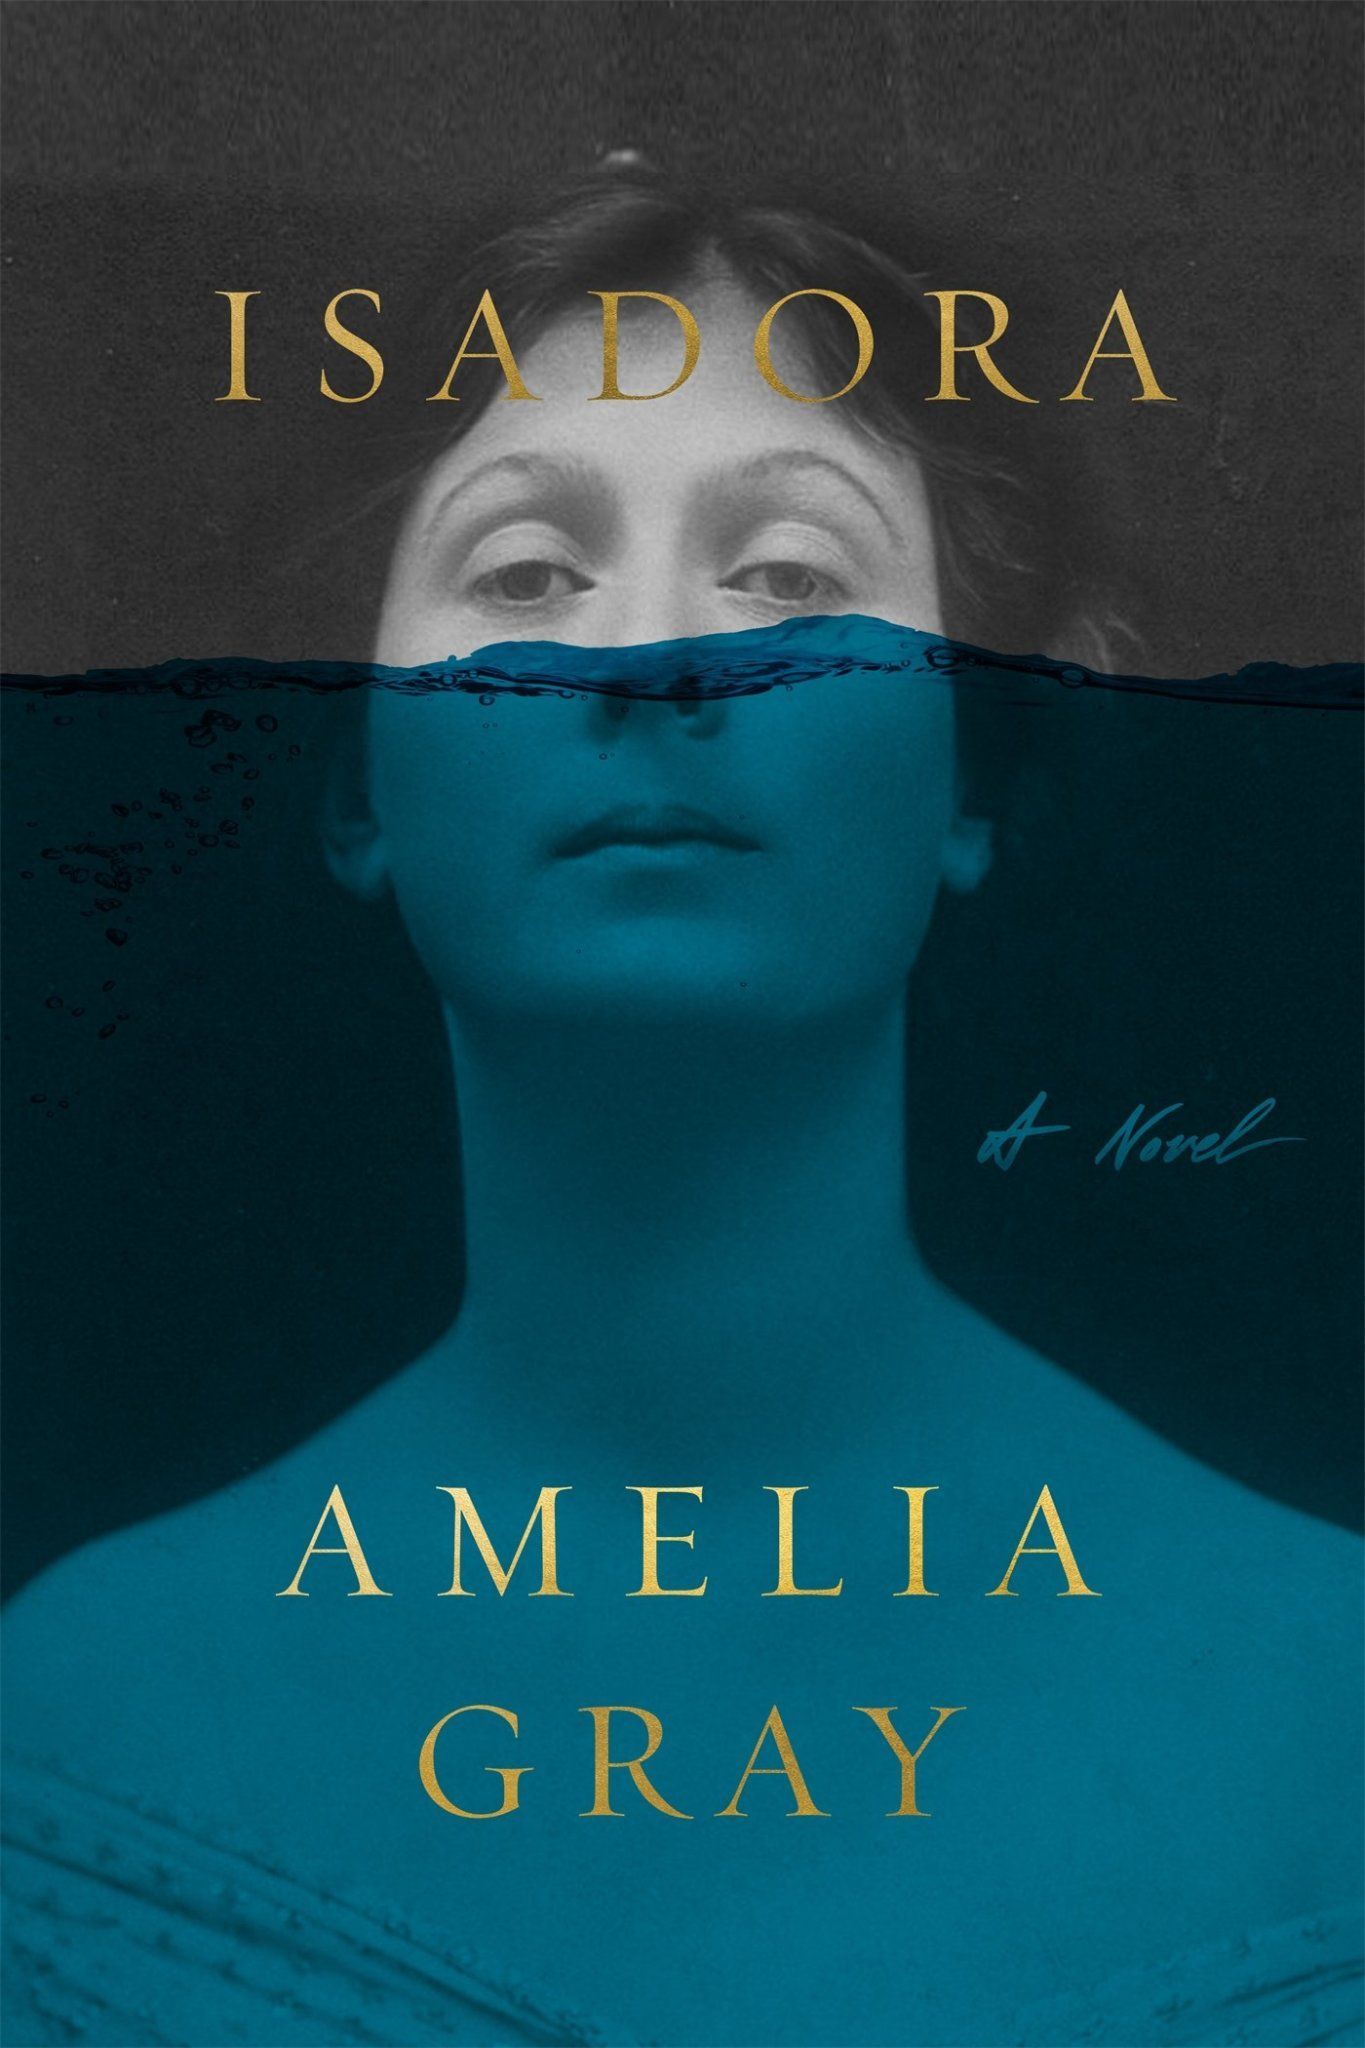 The Dance of Grief: On Amelia Gray’s “Isadora”